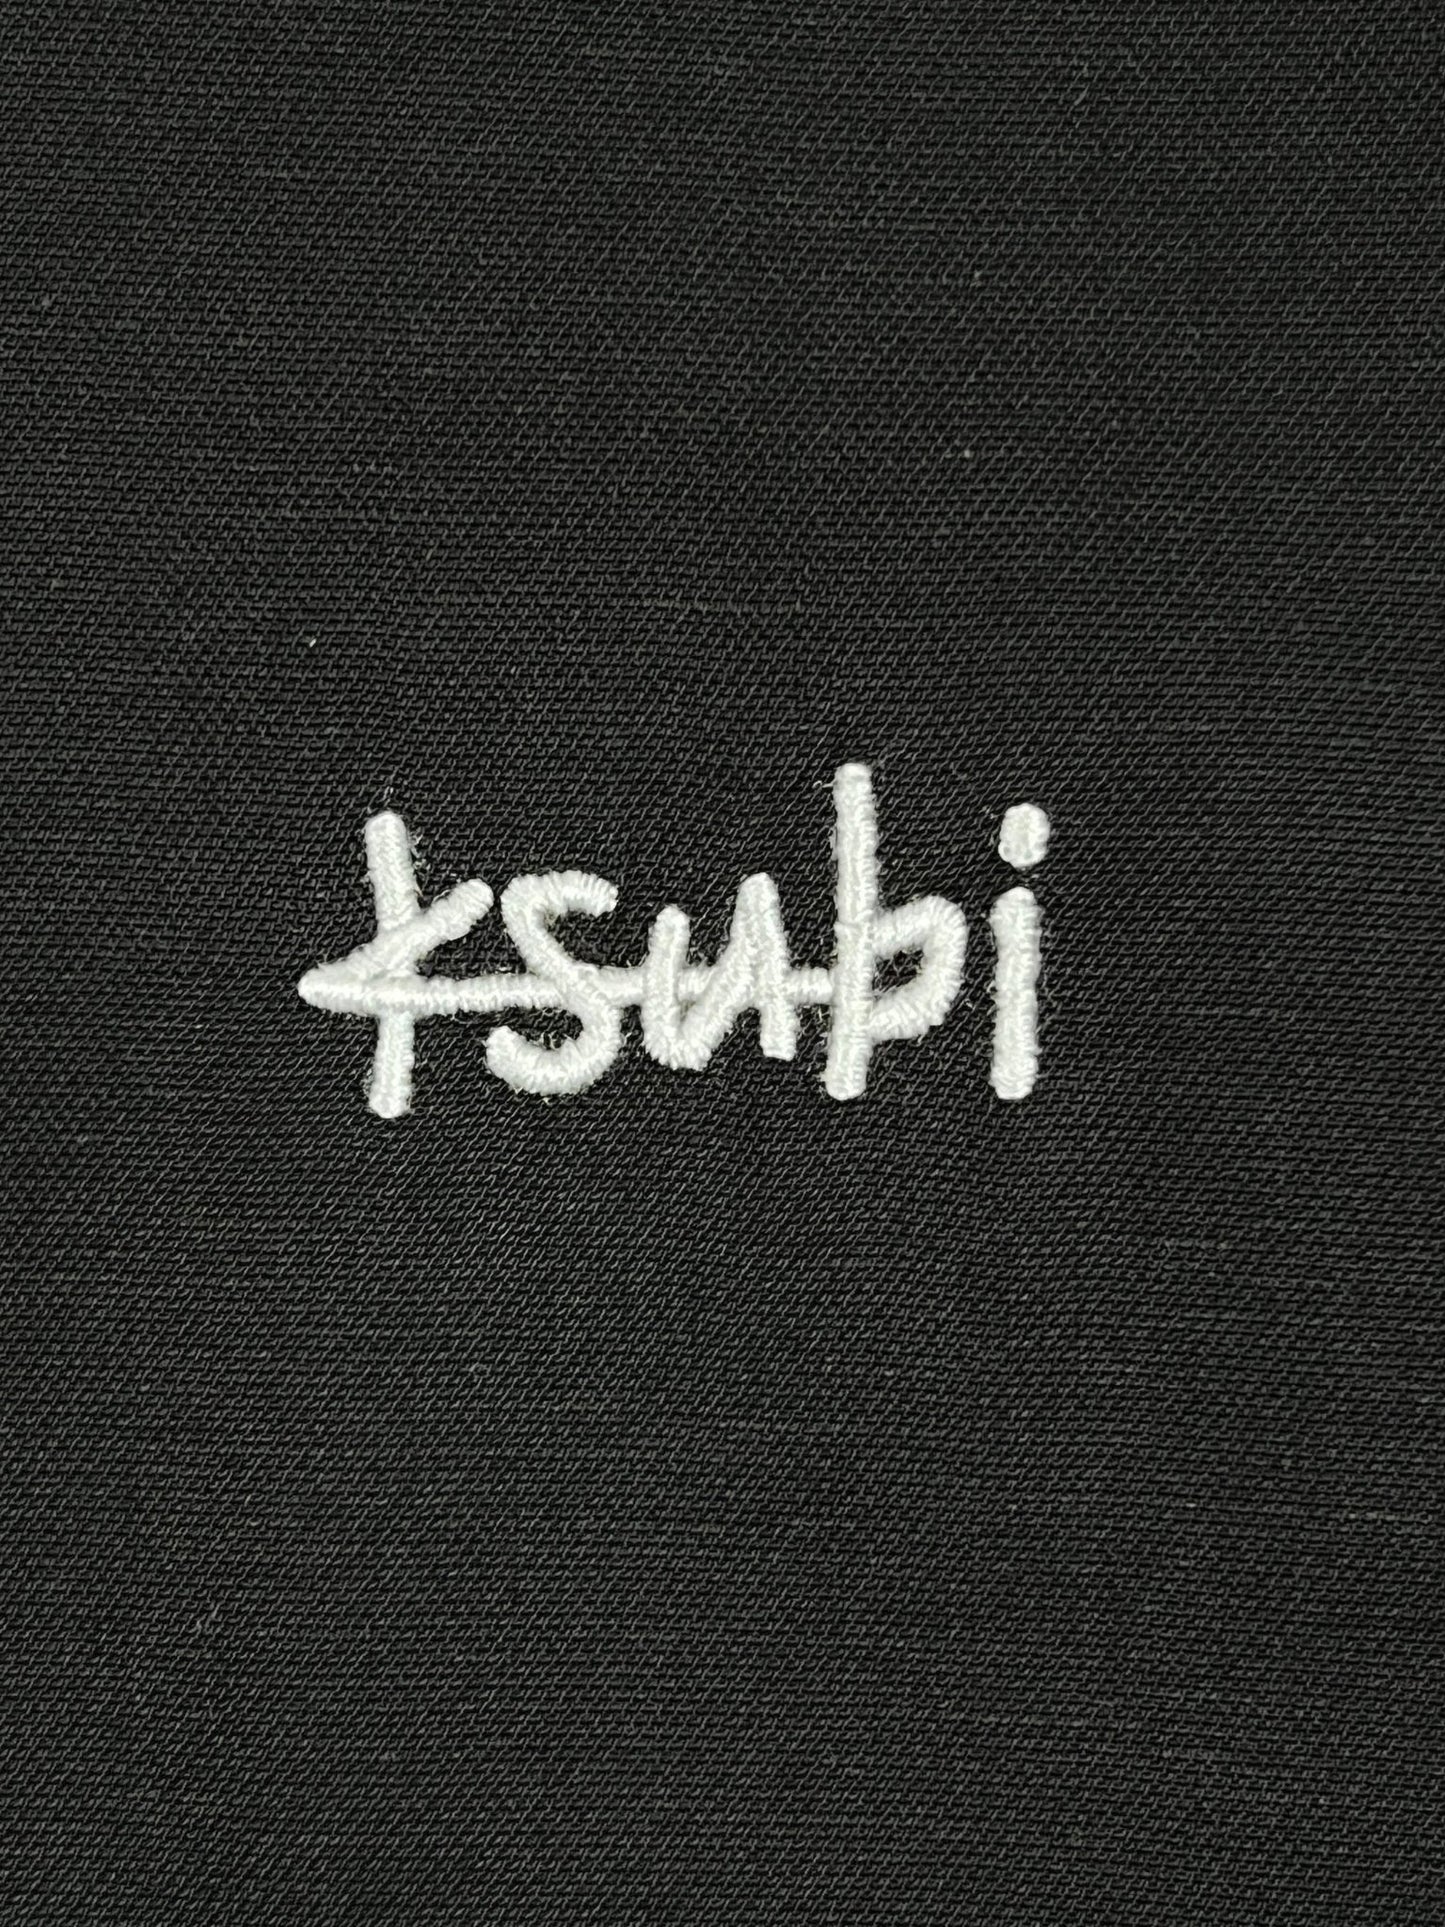 A close up of a black KSUBI DOWNTOWN RESORT SS SHIRT with the word Ksubi written on it.